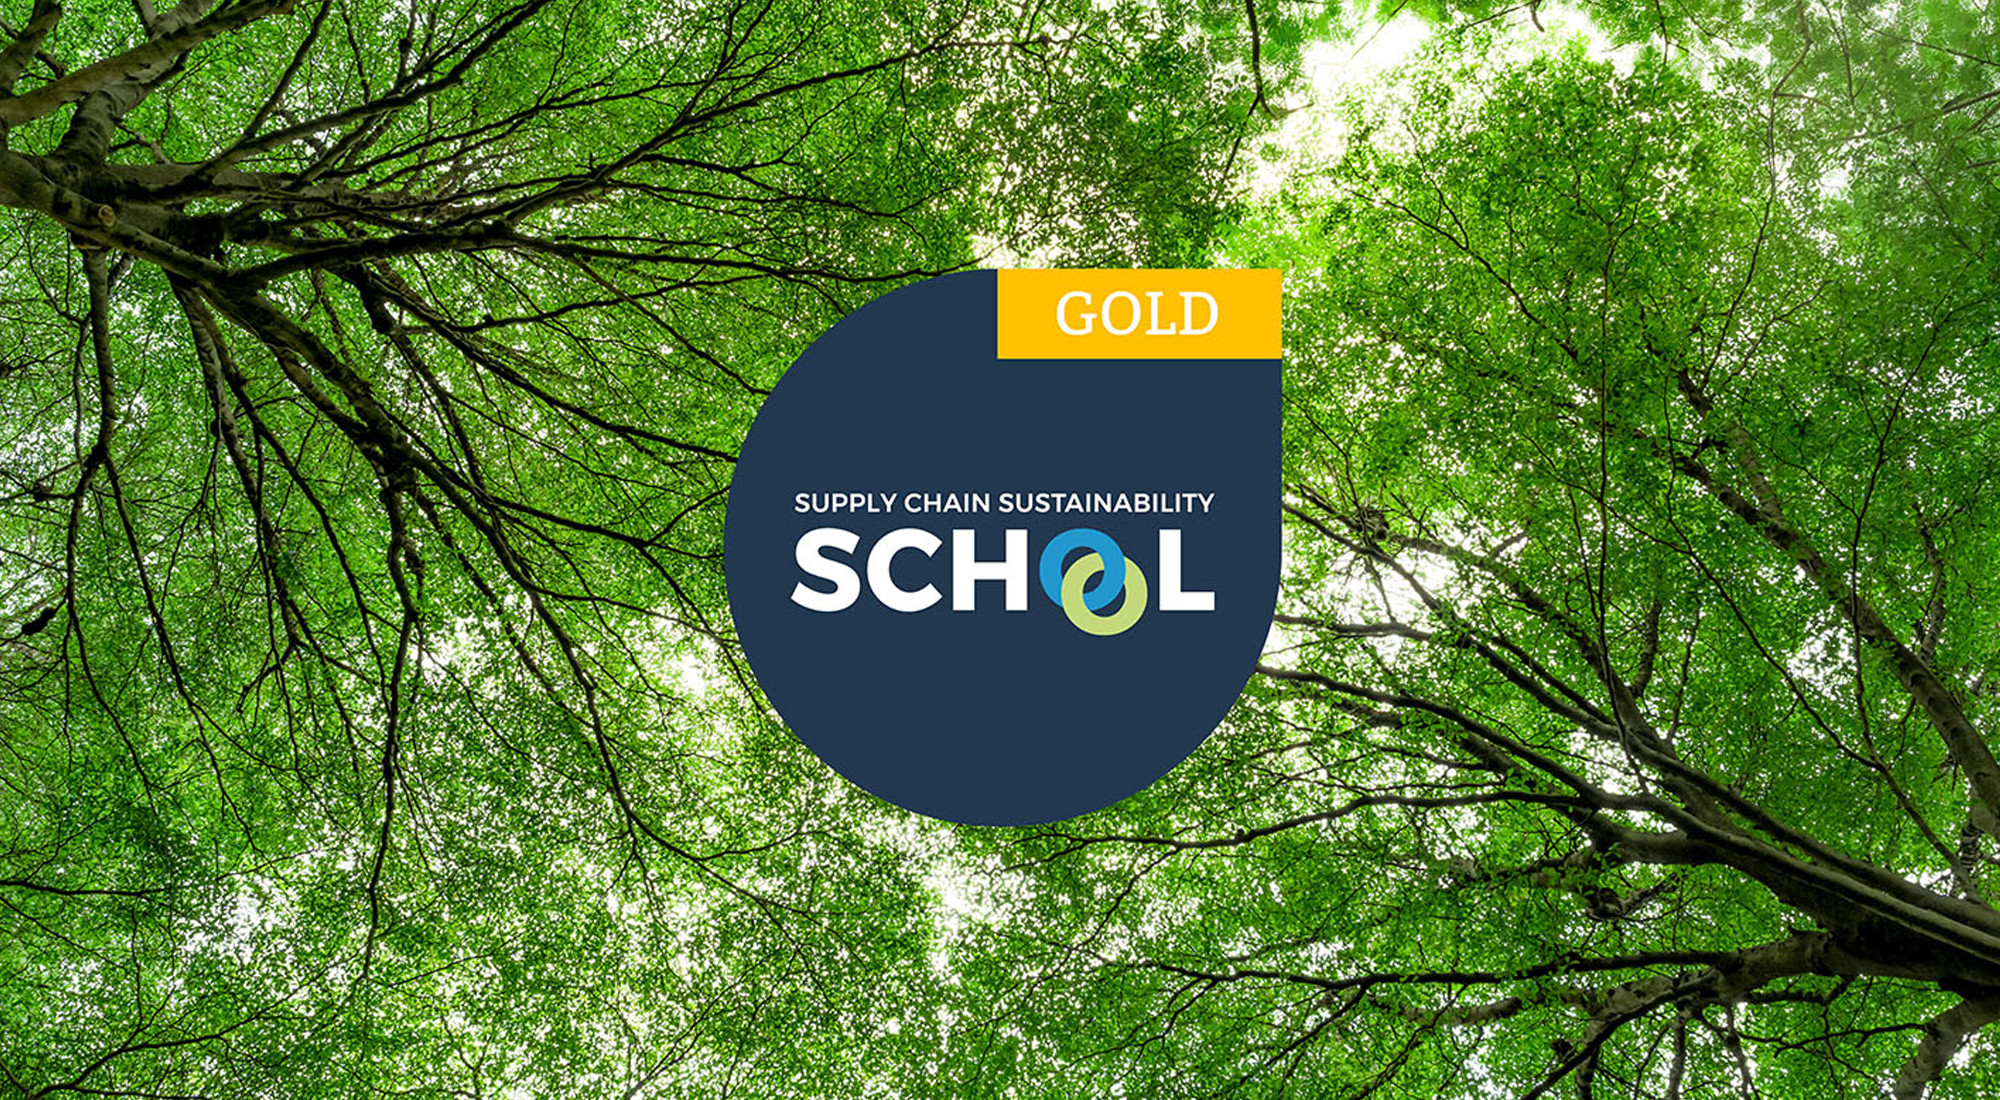 Gold Membership Level In Supply Chain Sustainability School